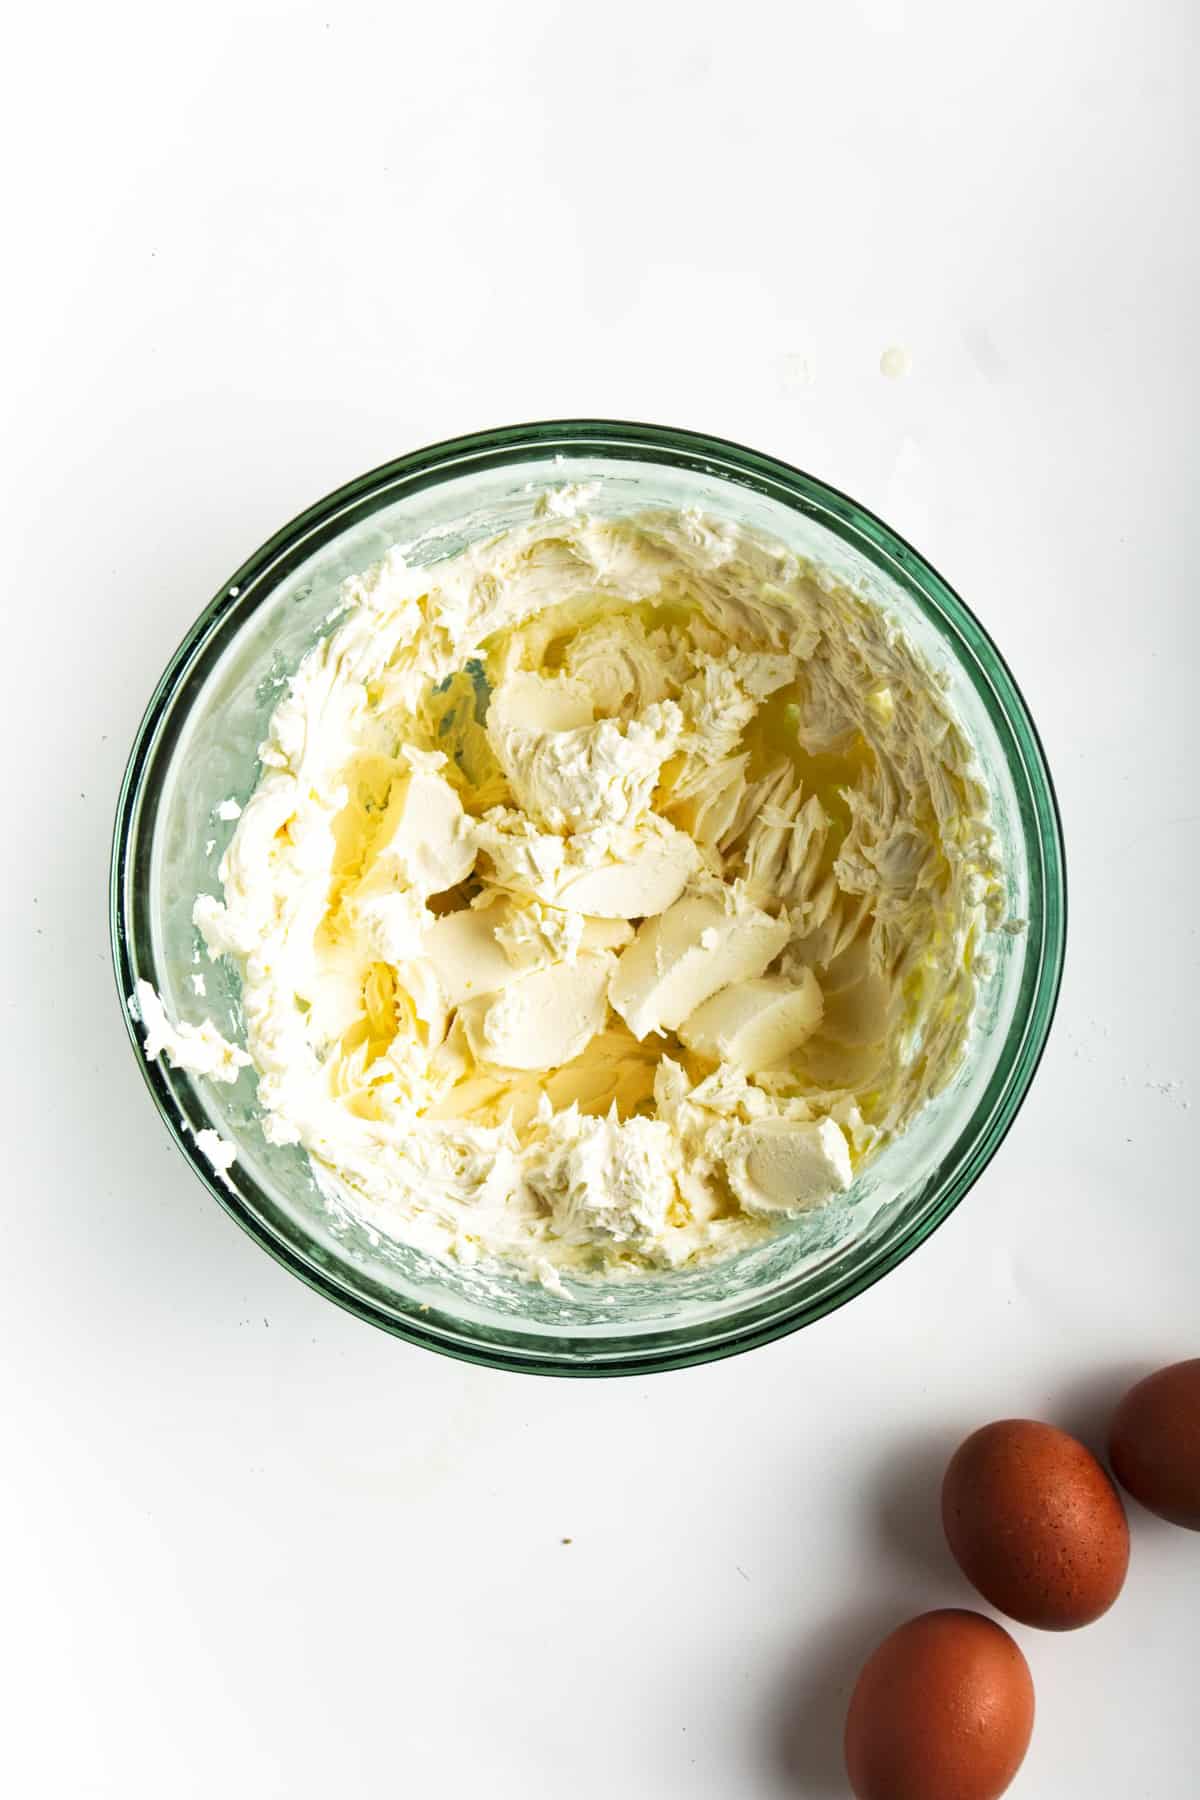 Cream cheese in glass bowl.